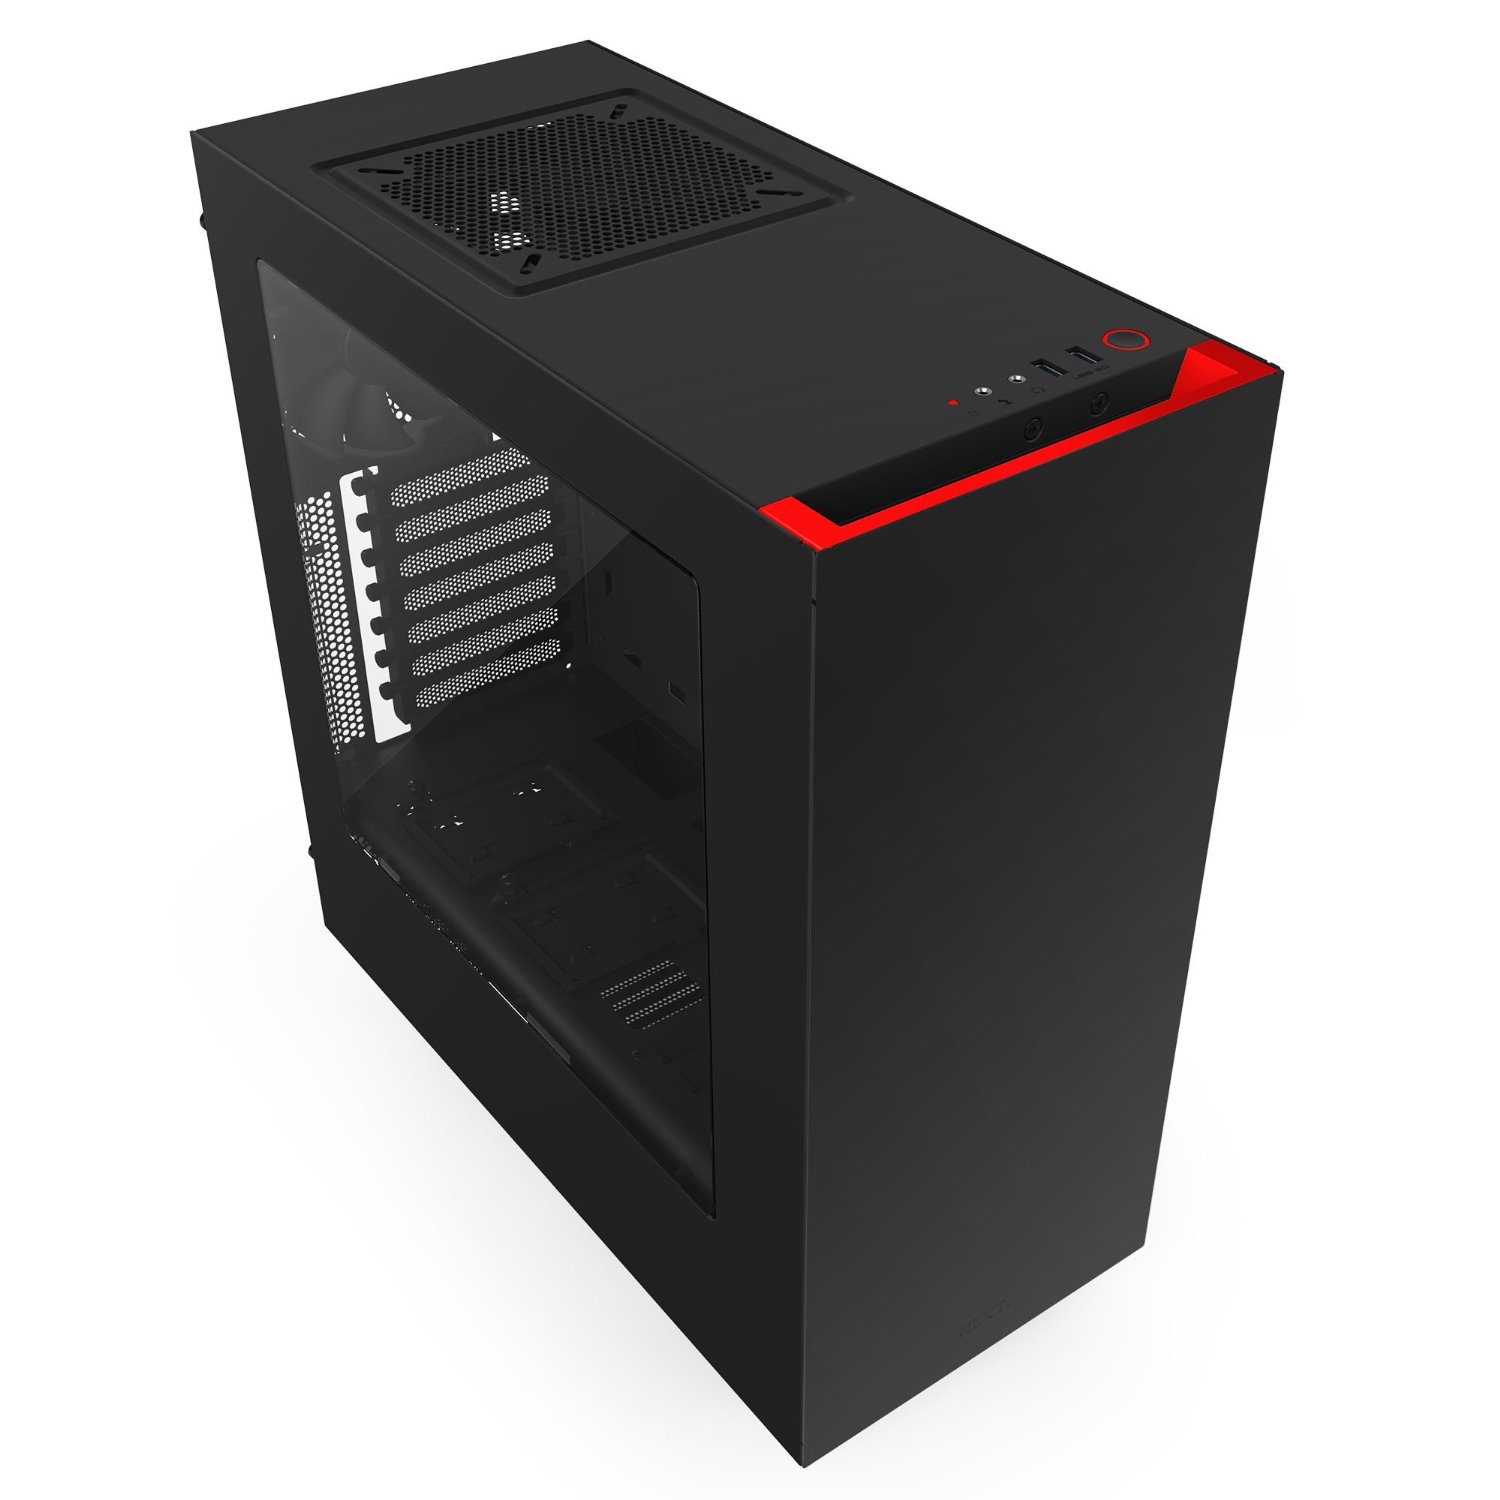 21068_nzxt_s340_black_red_pac__4_